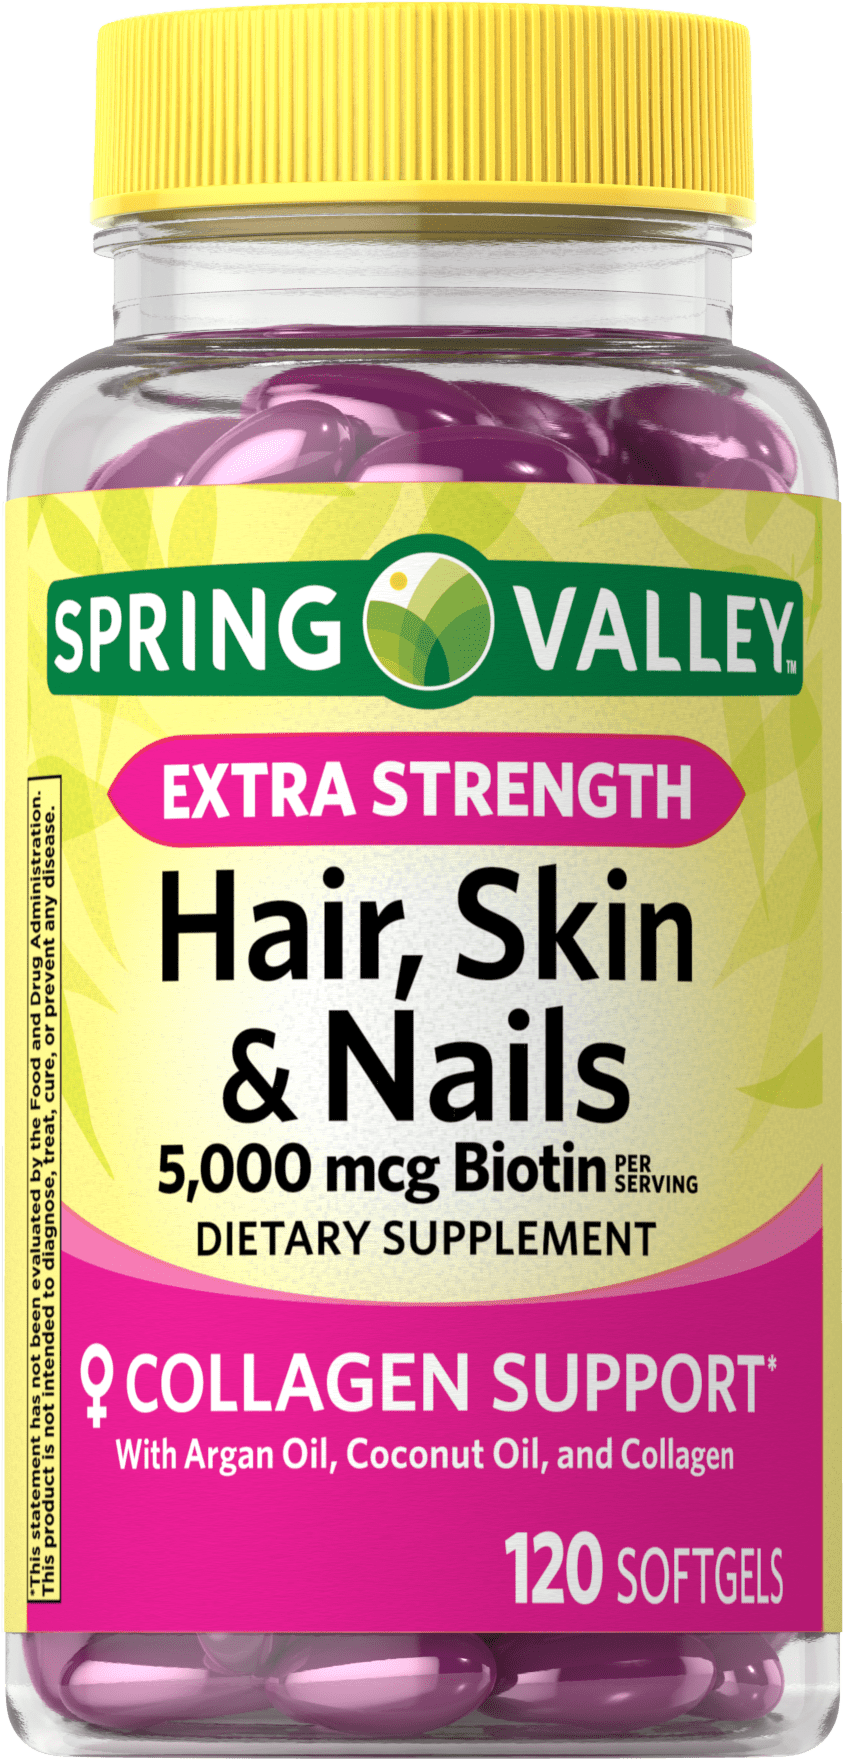 Sheneed Hair Skin  Nails Vitamins with Biotin Collagen Keratin  VitC  for Growth  Quality Buy Sheneed Hair Skin  Nails Vitamins with Biotin  Collagen Keratin  VitC for Growth 